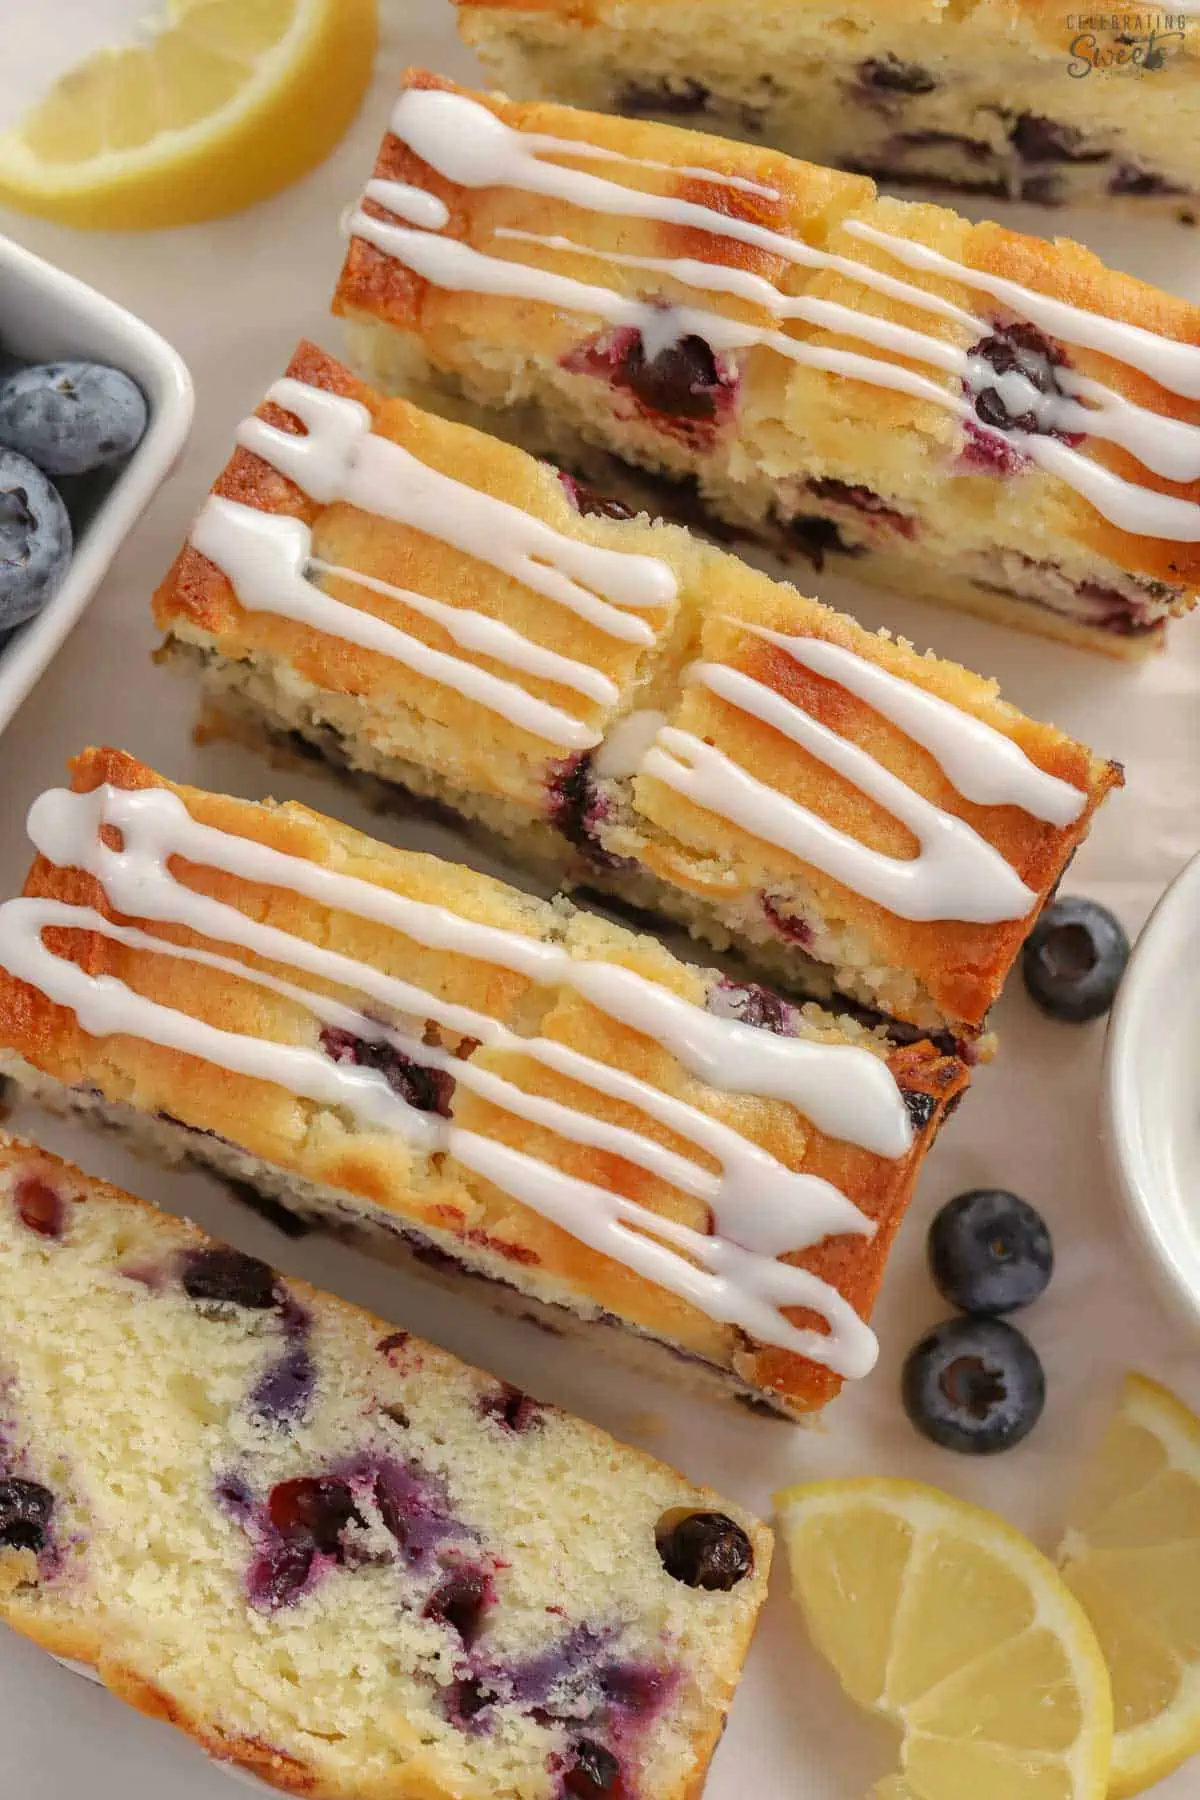 Slices of lemon blueberry bread with white icing drizzled over the top.